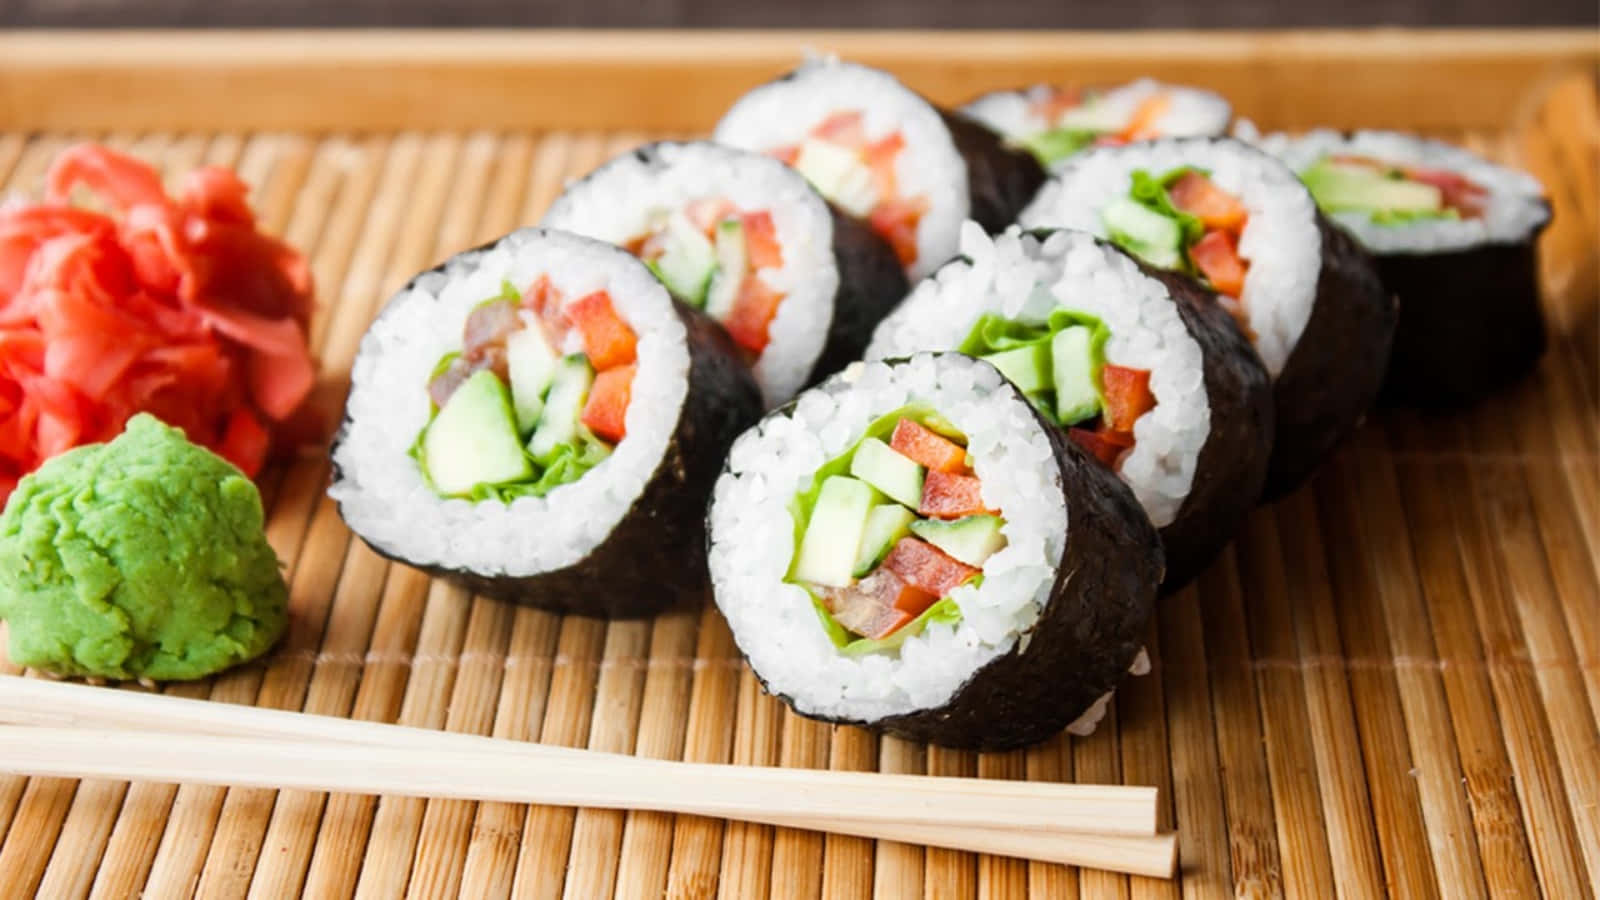 Enjoy a variety of delicious sushi combinations.